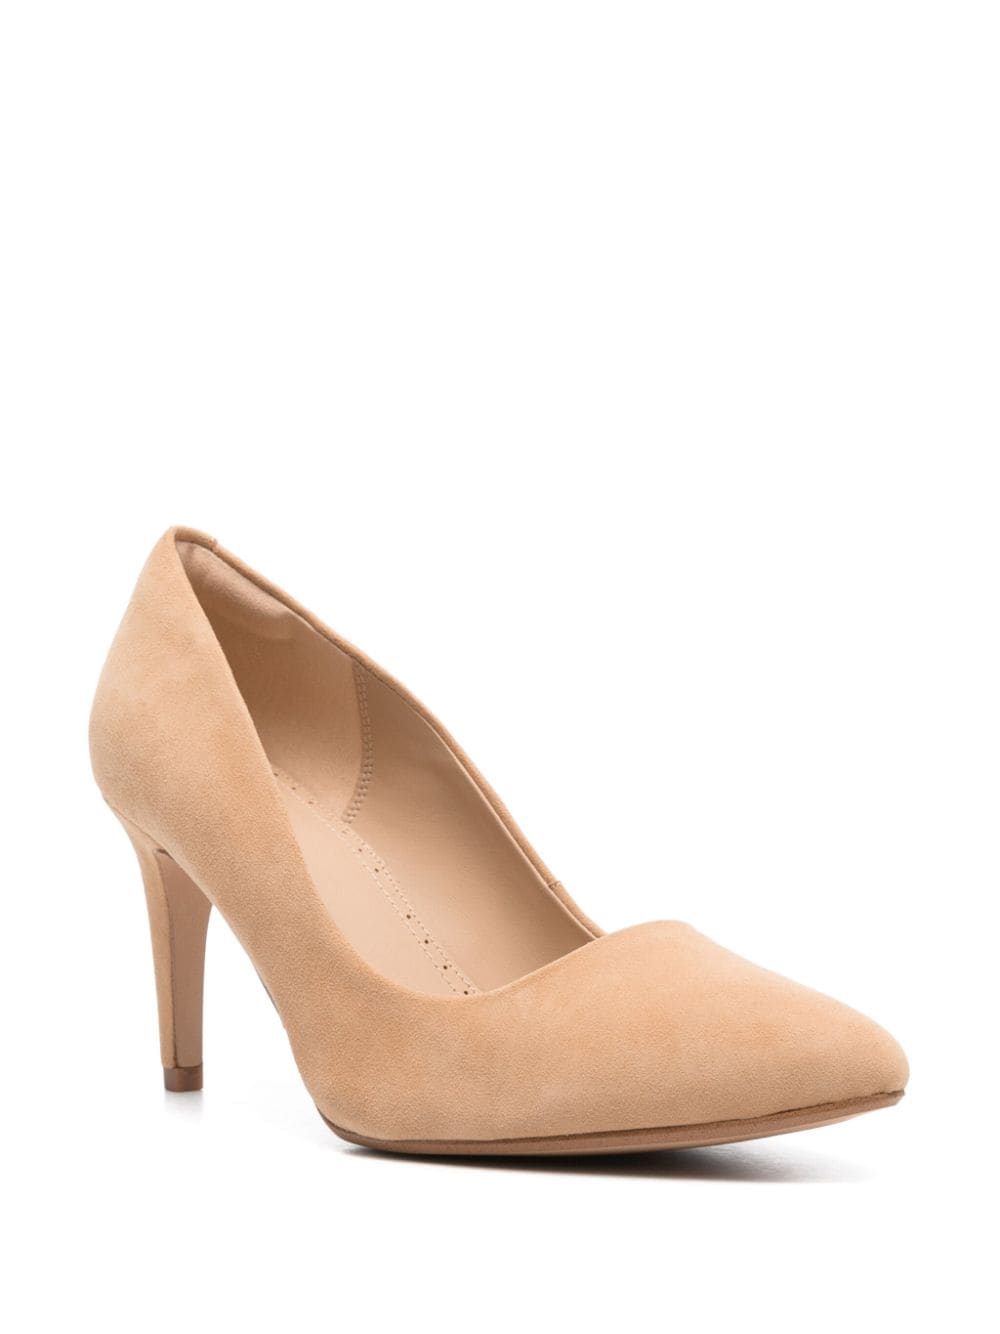 Image 2 of Clarks 75mm Laina Rae suede pumps